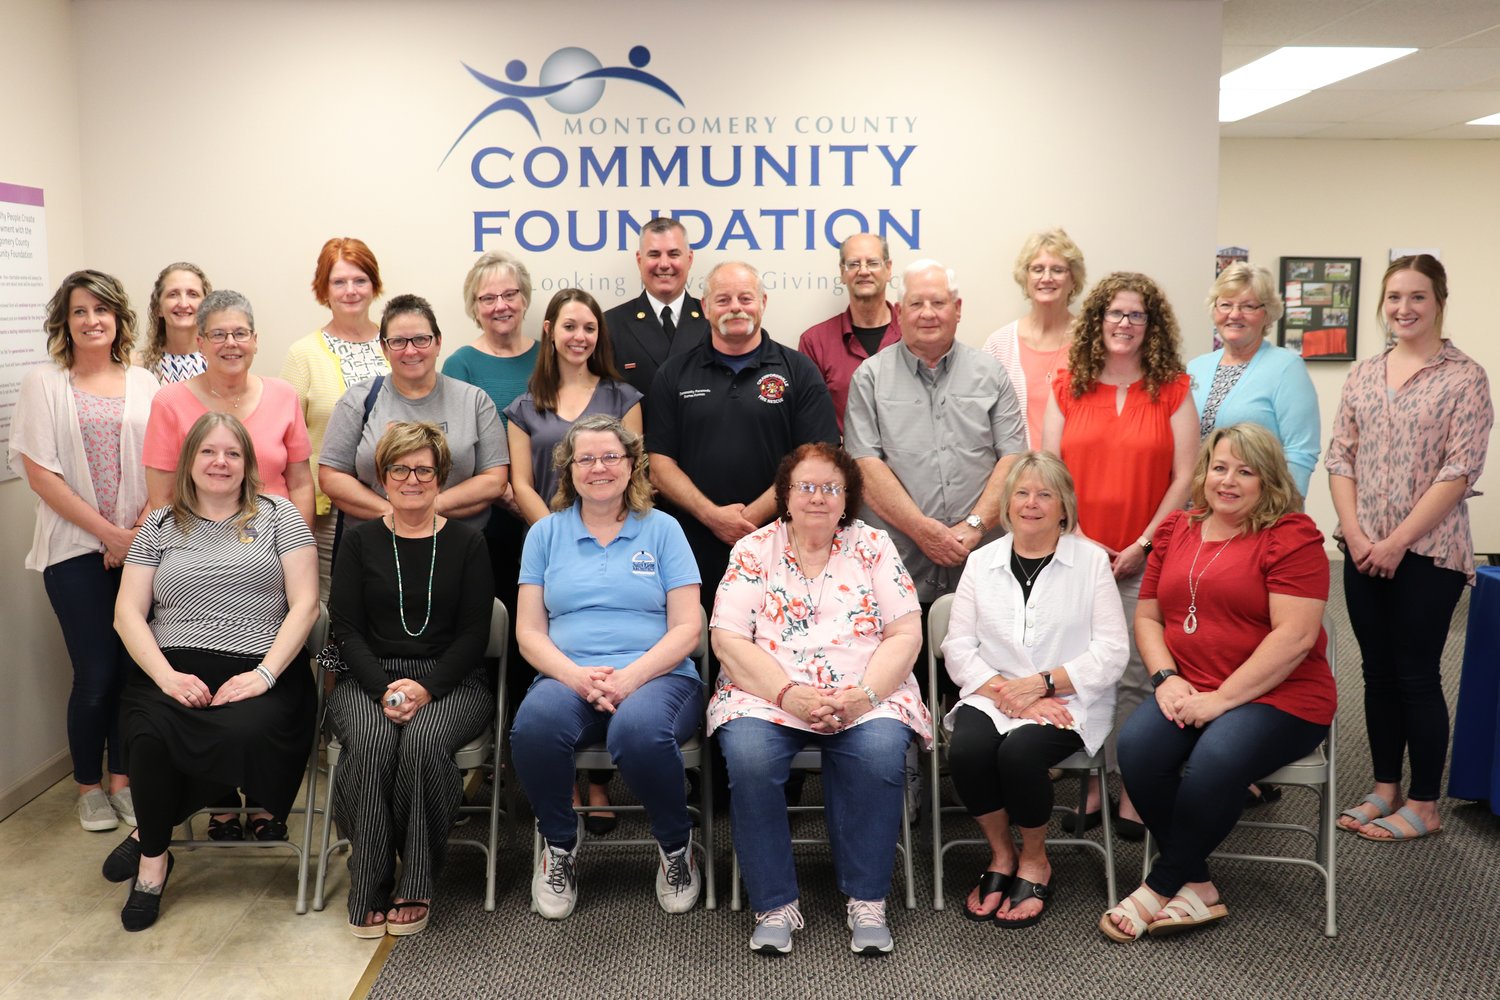 Montgomery County Community Foundation awarded nine grants totaling $144,292. Grantees included Animal Welfare League, Art League, Crawfordsville Fire Department for Project Swaddle, Crawfordsville Masonic Temple Foundation, Lew Wallace Study Preservation Society, Montgomery County Free Clinic, New Hope Christian Preschool, North Montgomery School Corporation and Walnut Township Community Organization.